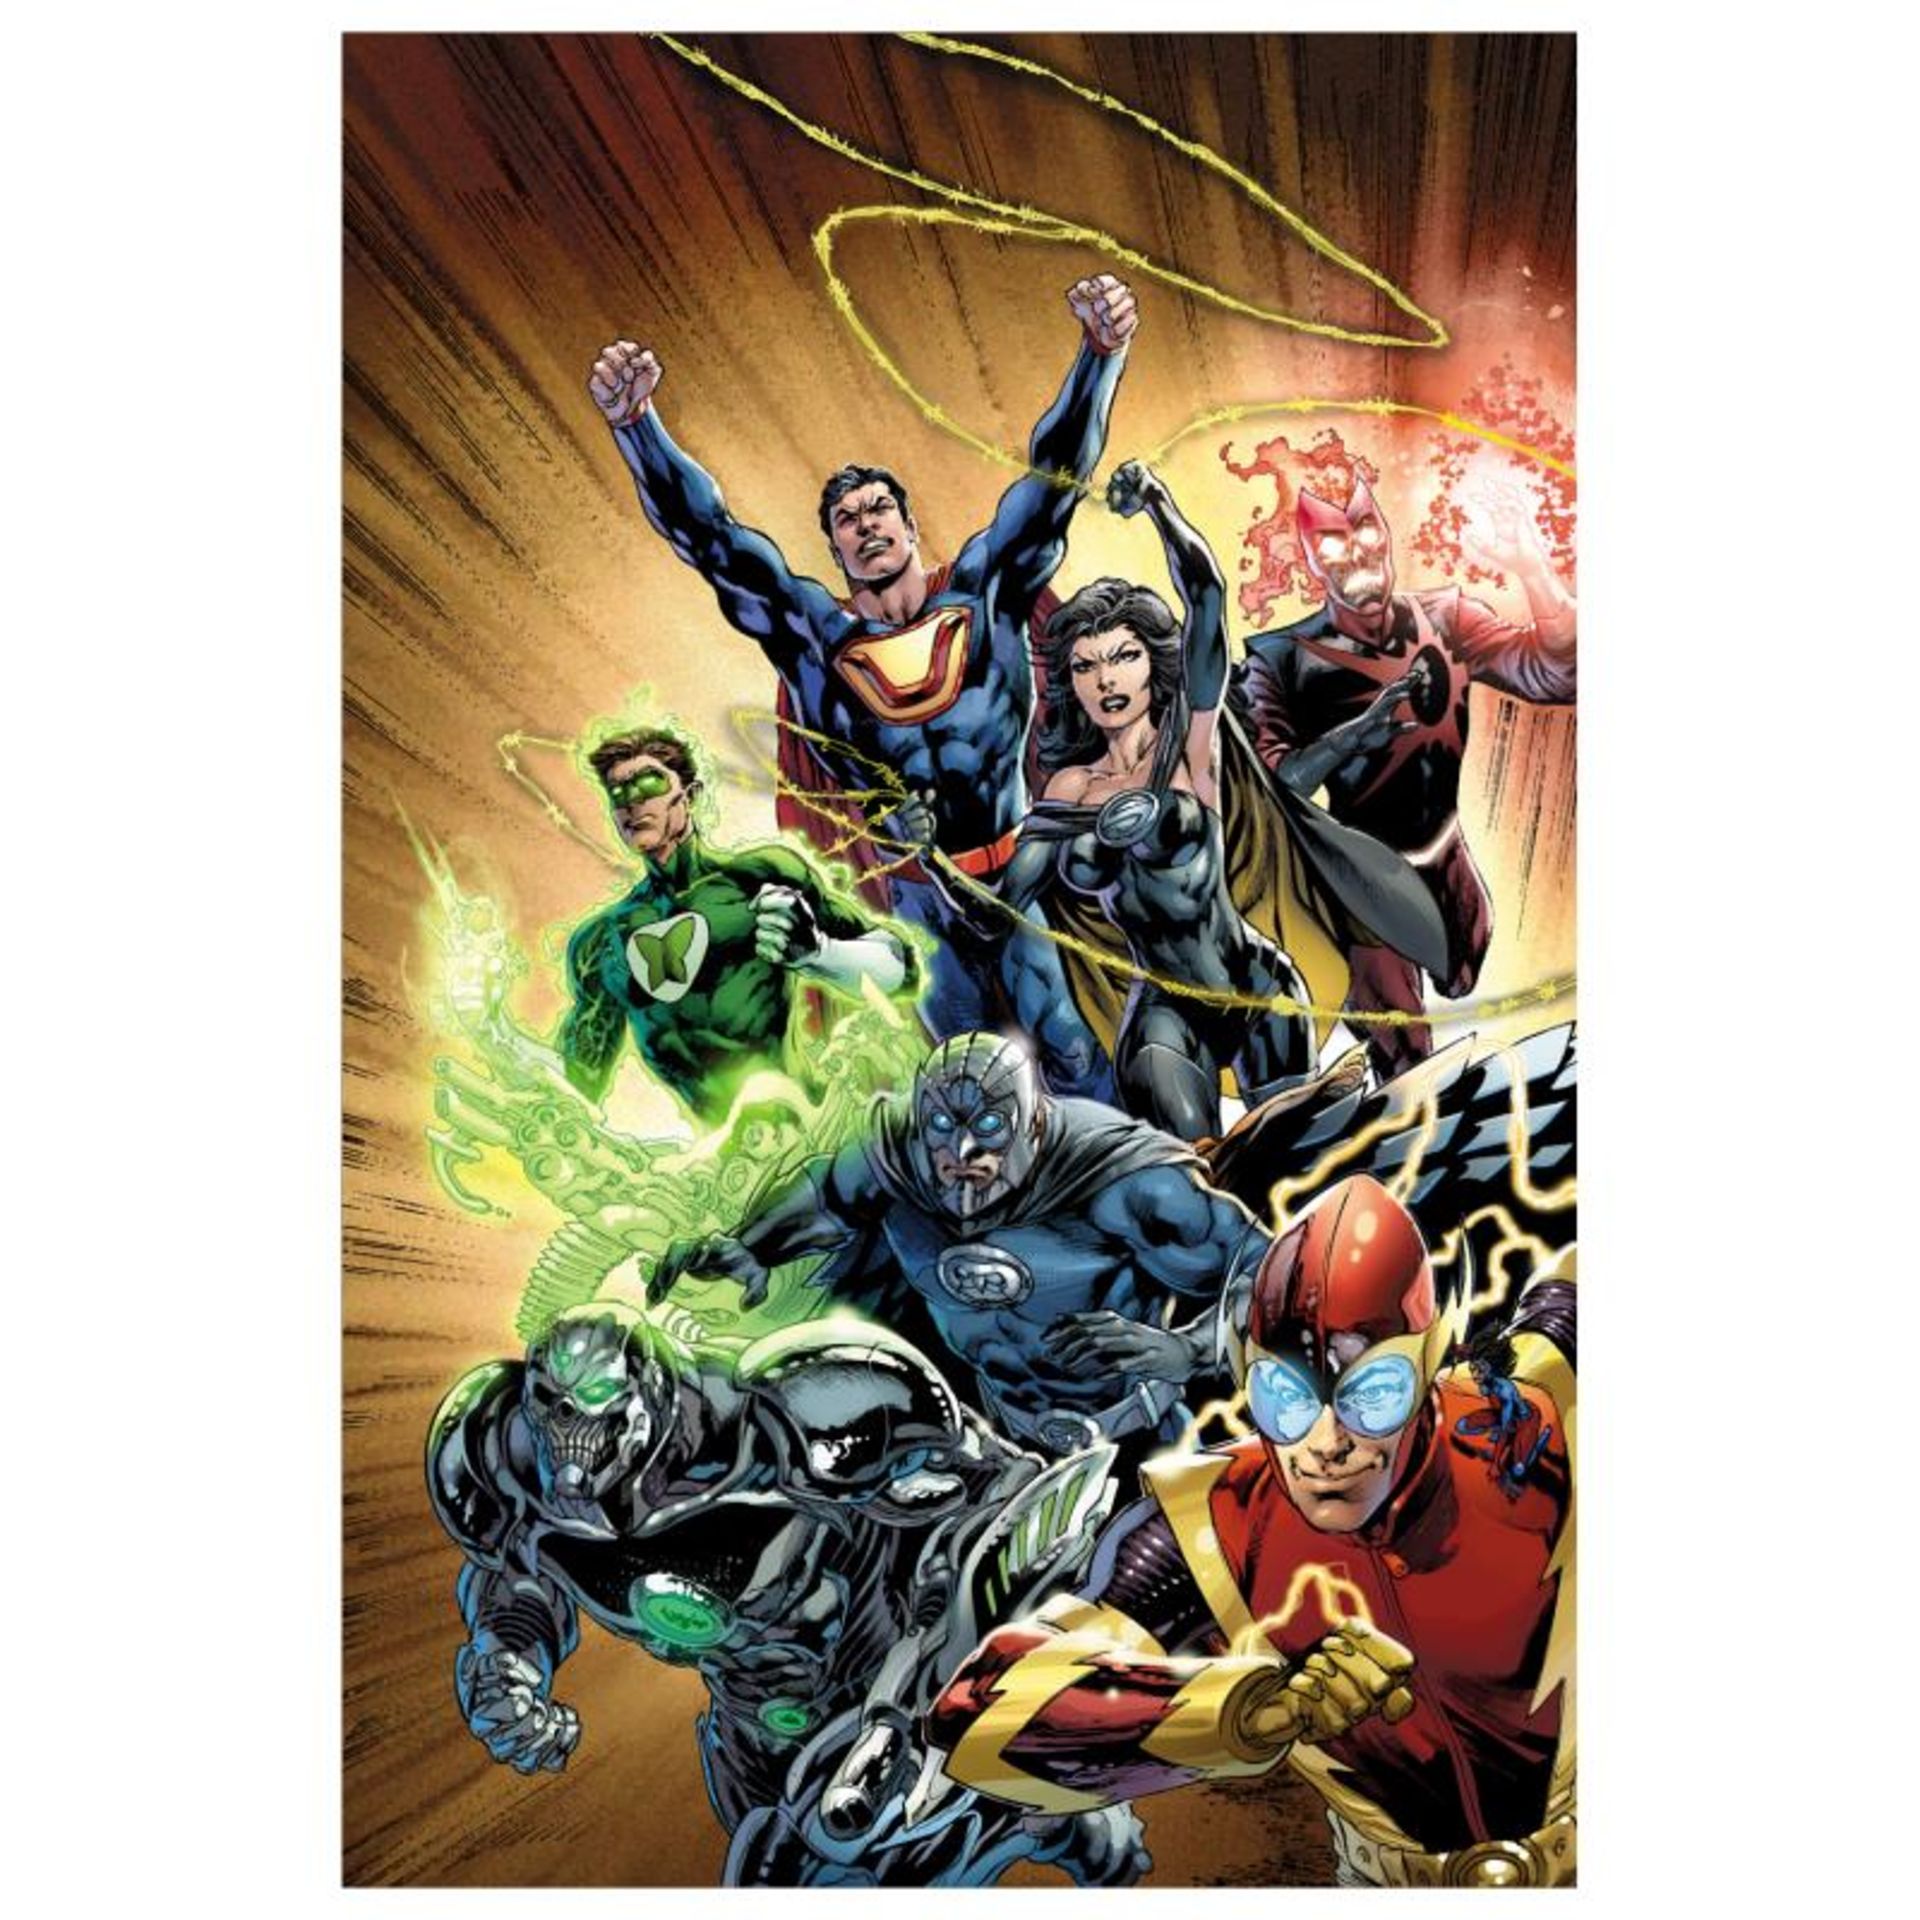 DC Comics, "Justice League #24" Numbered Limited Edition Giclee on Canvas by Iva